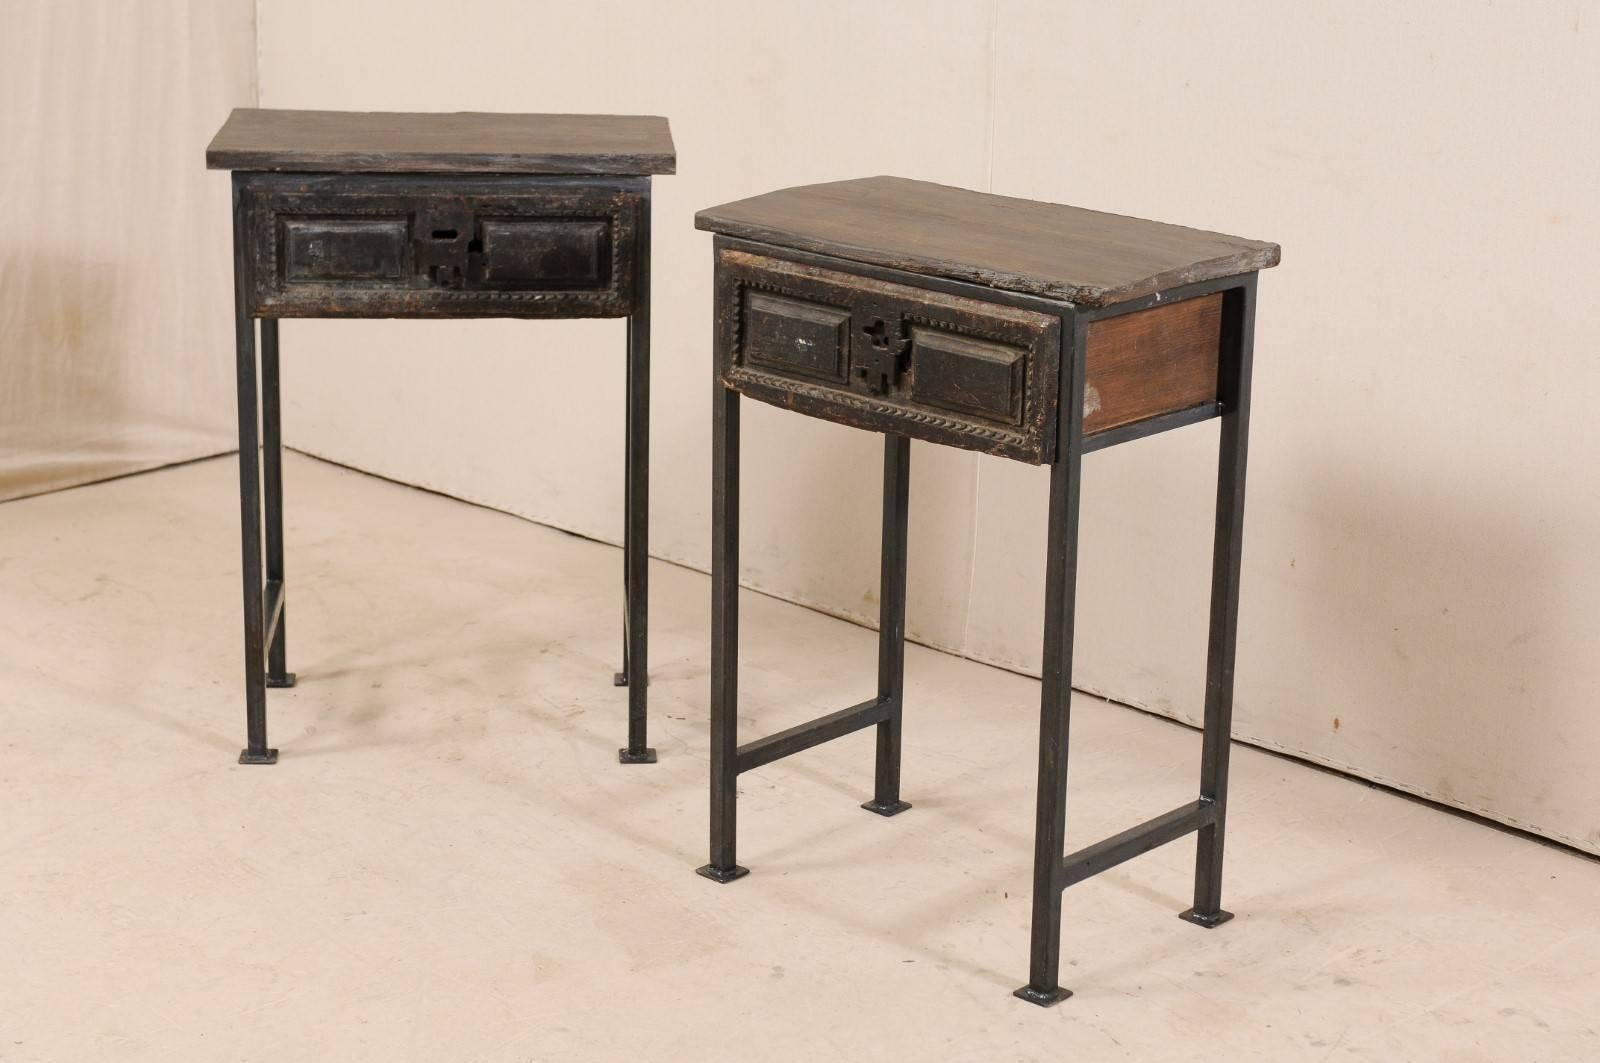 Hand-Carved Pair of Spanish 18th Century Single Drawer Wood Side Tables on Iron Legs